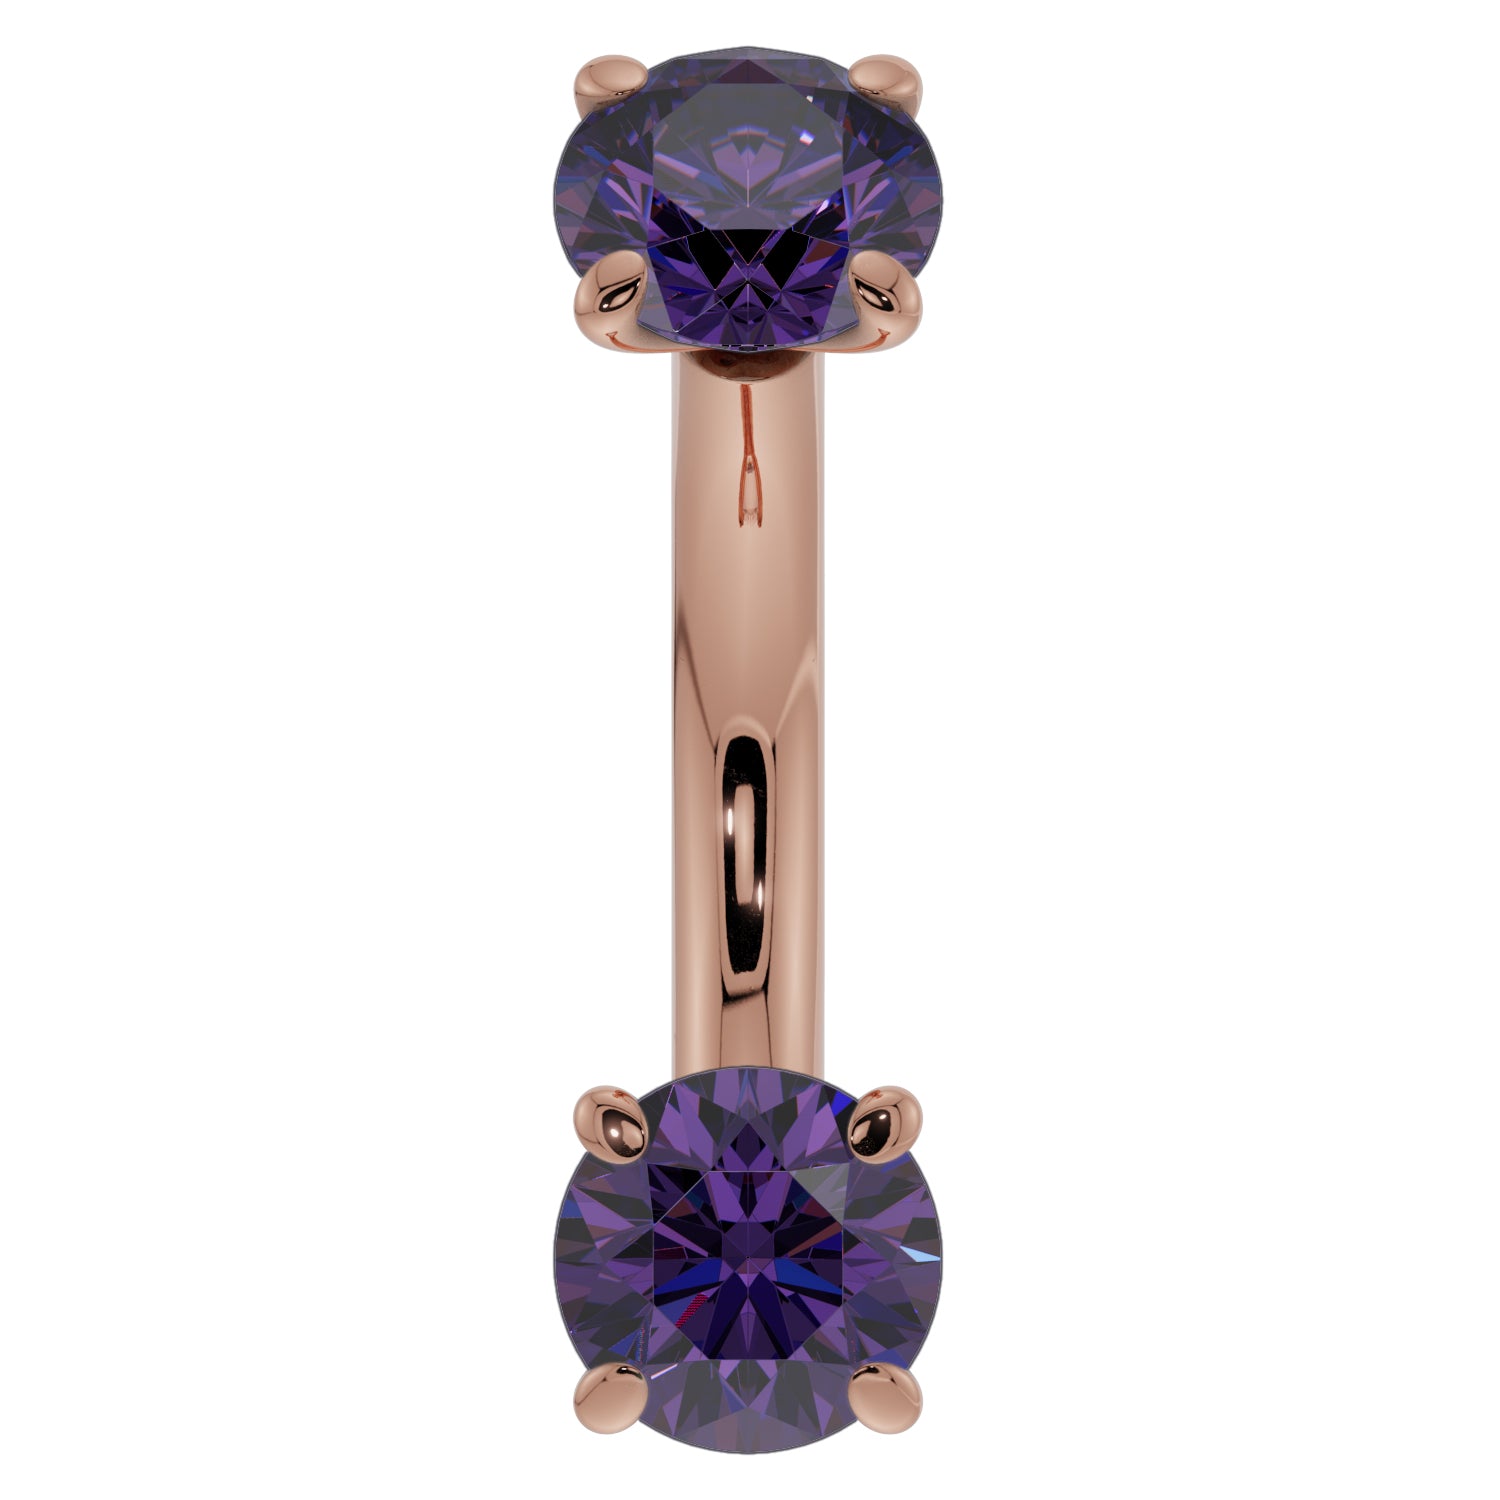 Amethyst Prong-Set Eyebrow Rook Belly Curved Barbell-14K Rose Gold   14G (1.6mm) (Belly Ring)   7 16